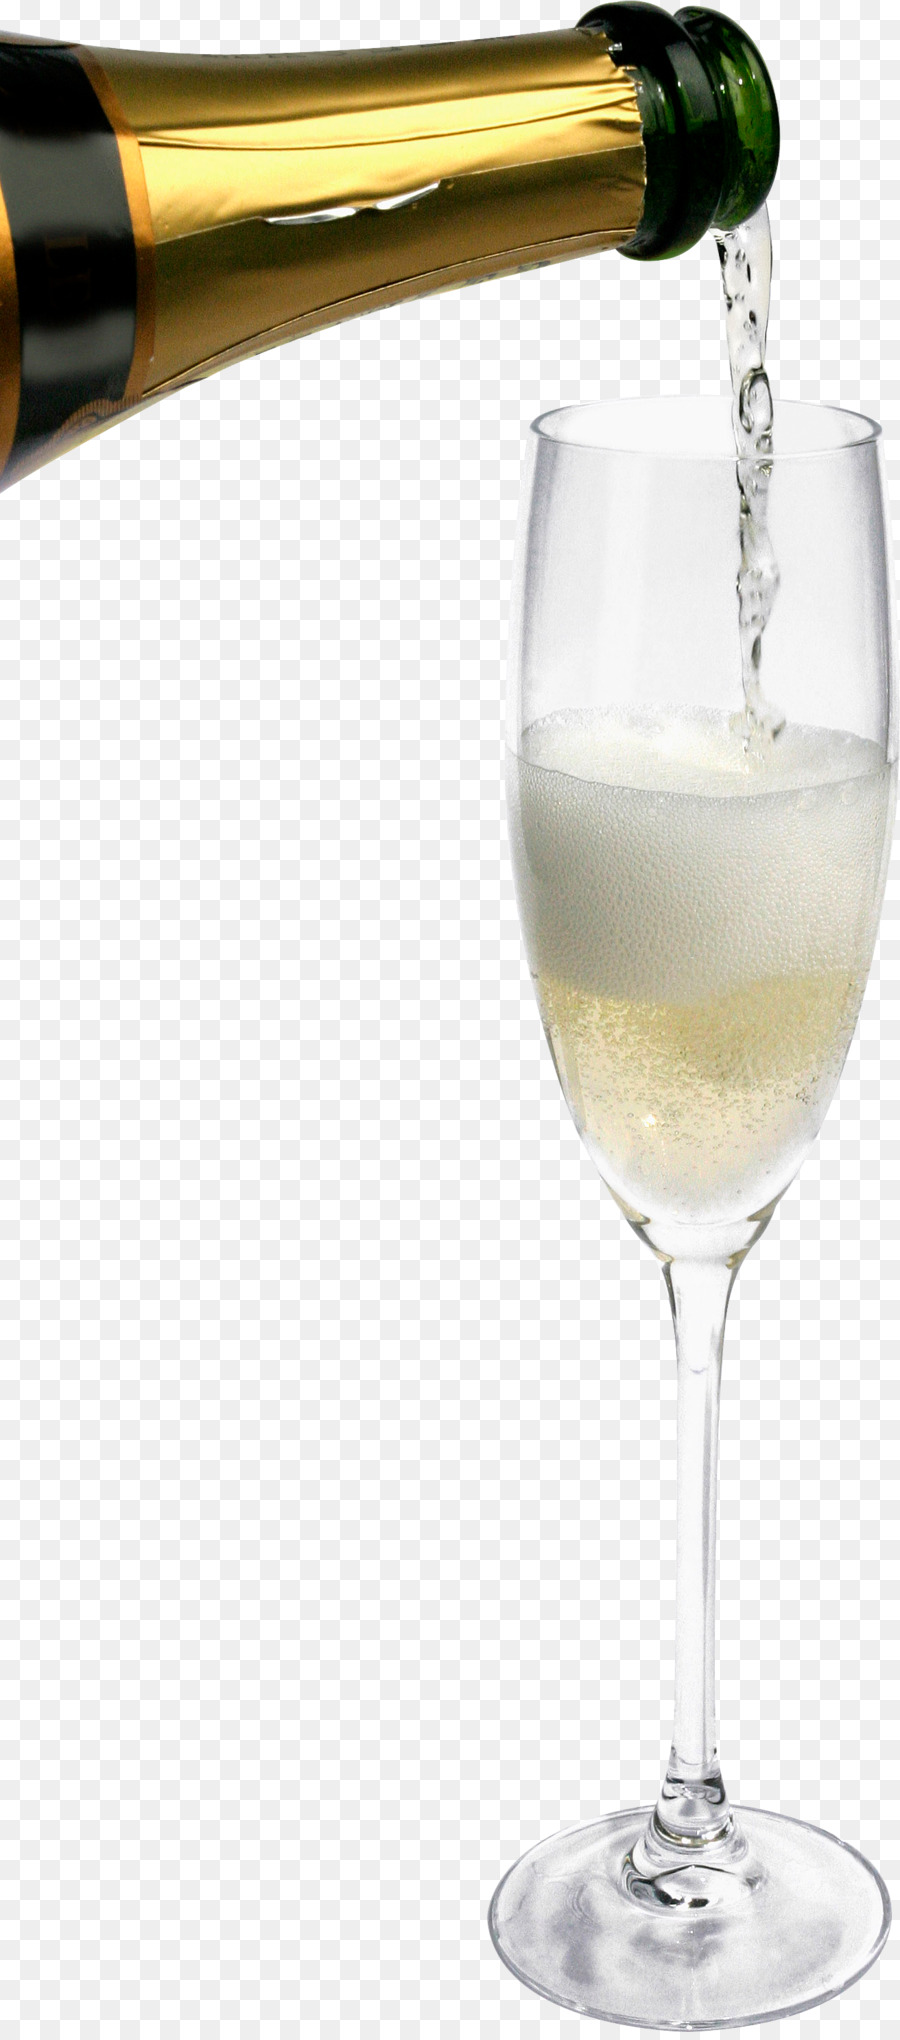 Champagne glass GIF Image Drink - champagne png download - 1312*2962 - Free Transparent Champagne png Download.